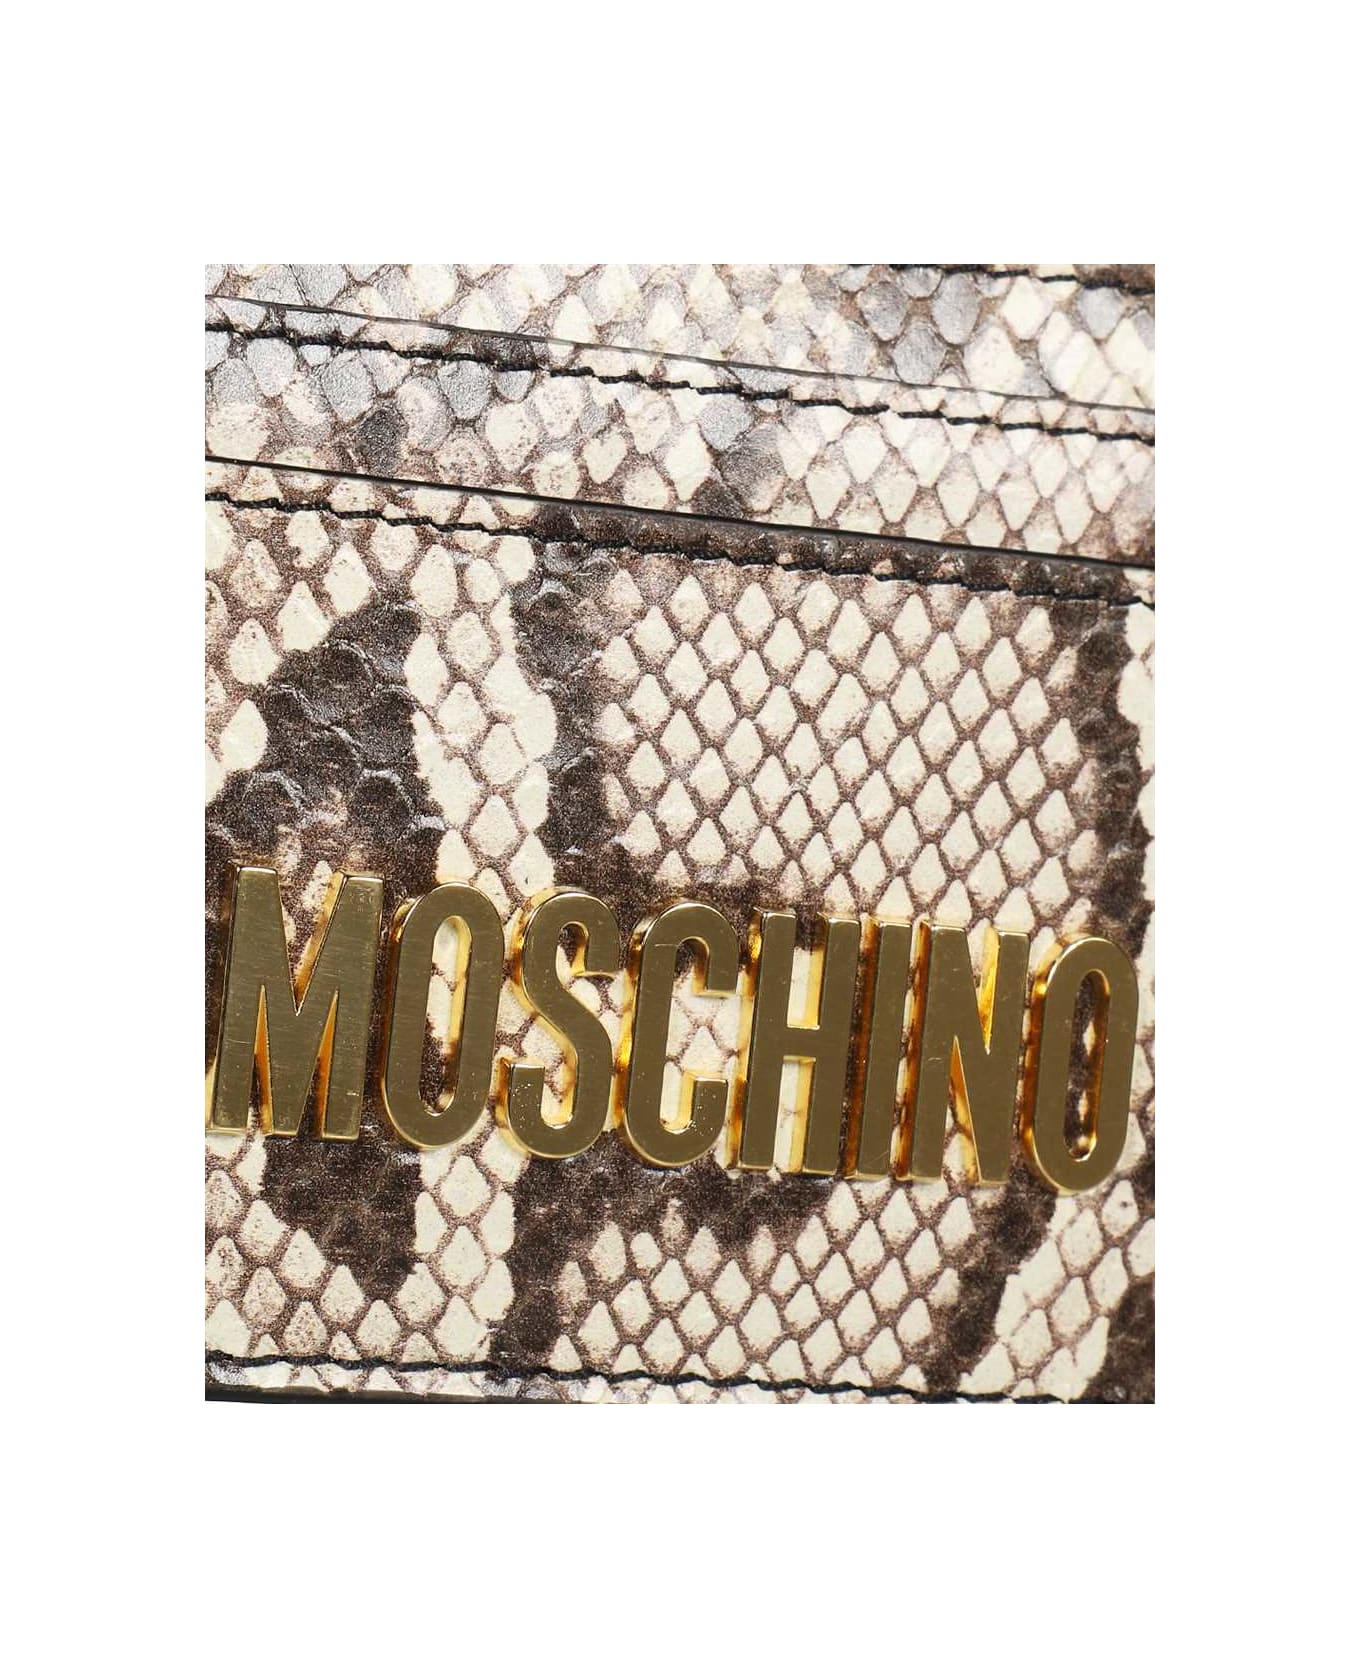 Moschino Leather Card Holder - Beige 財布